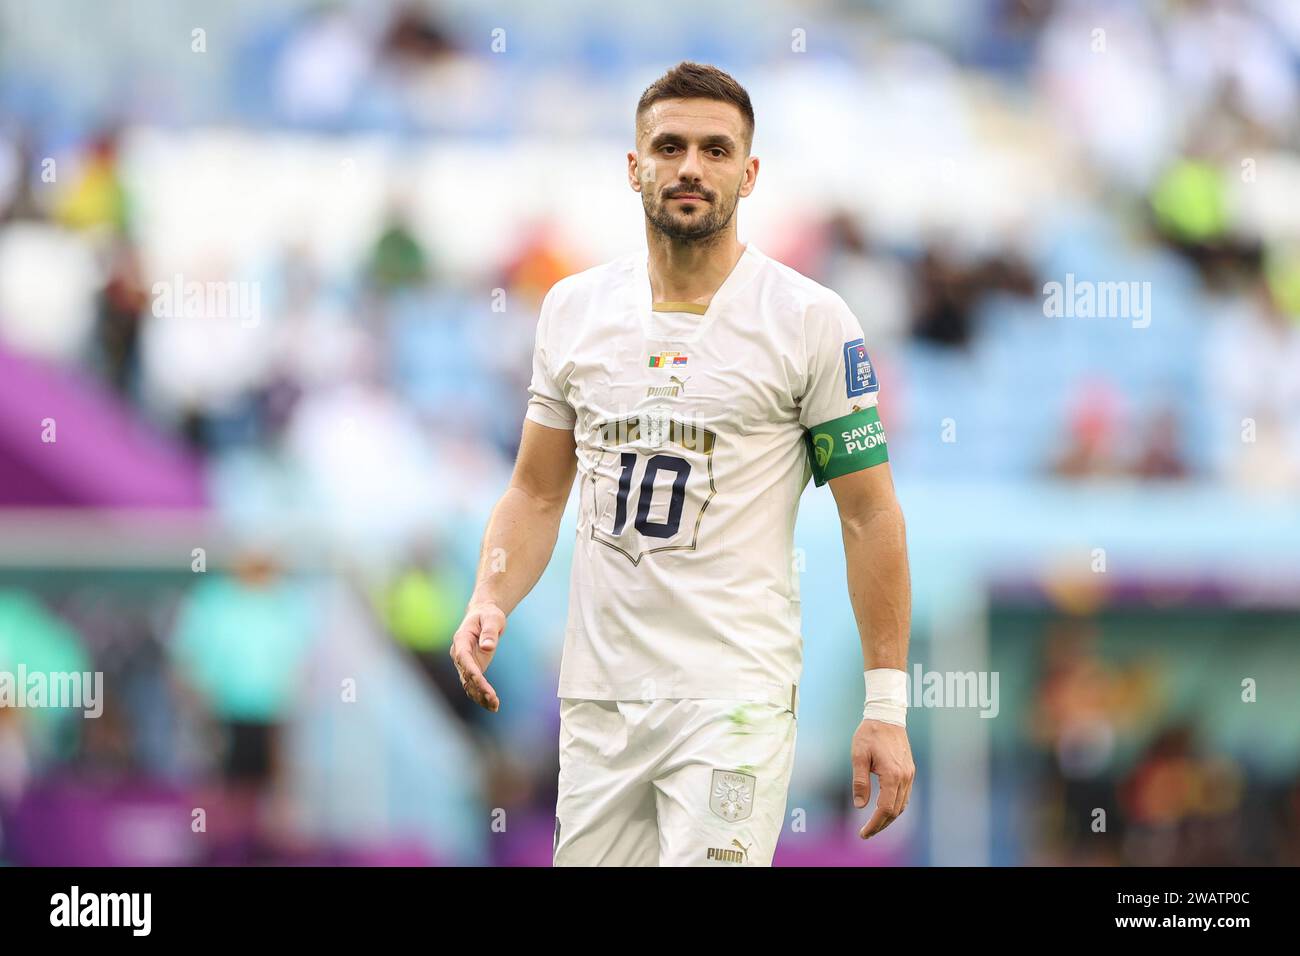 Dusan Tadic of Serbia seen during the FIFA World Cup Qatar 2022 match between Cameroon and Serbia at Al Janoub Stadium. Final score: Cameroon 3:3 Serbia. Stock Photo